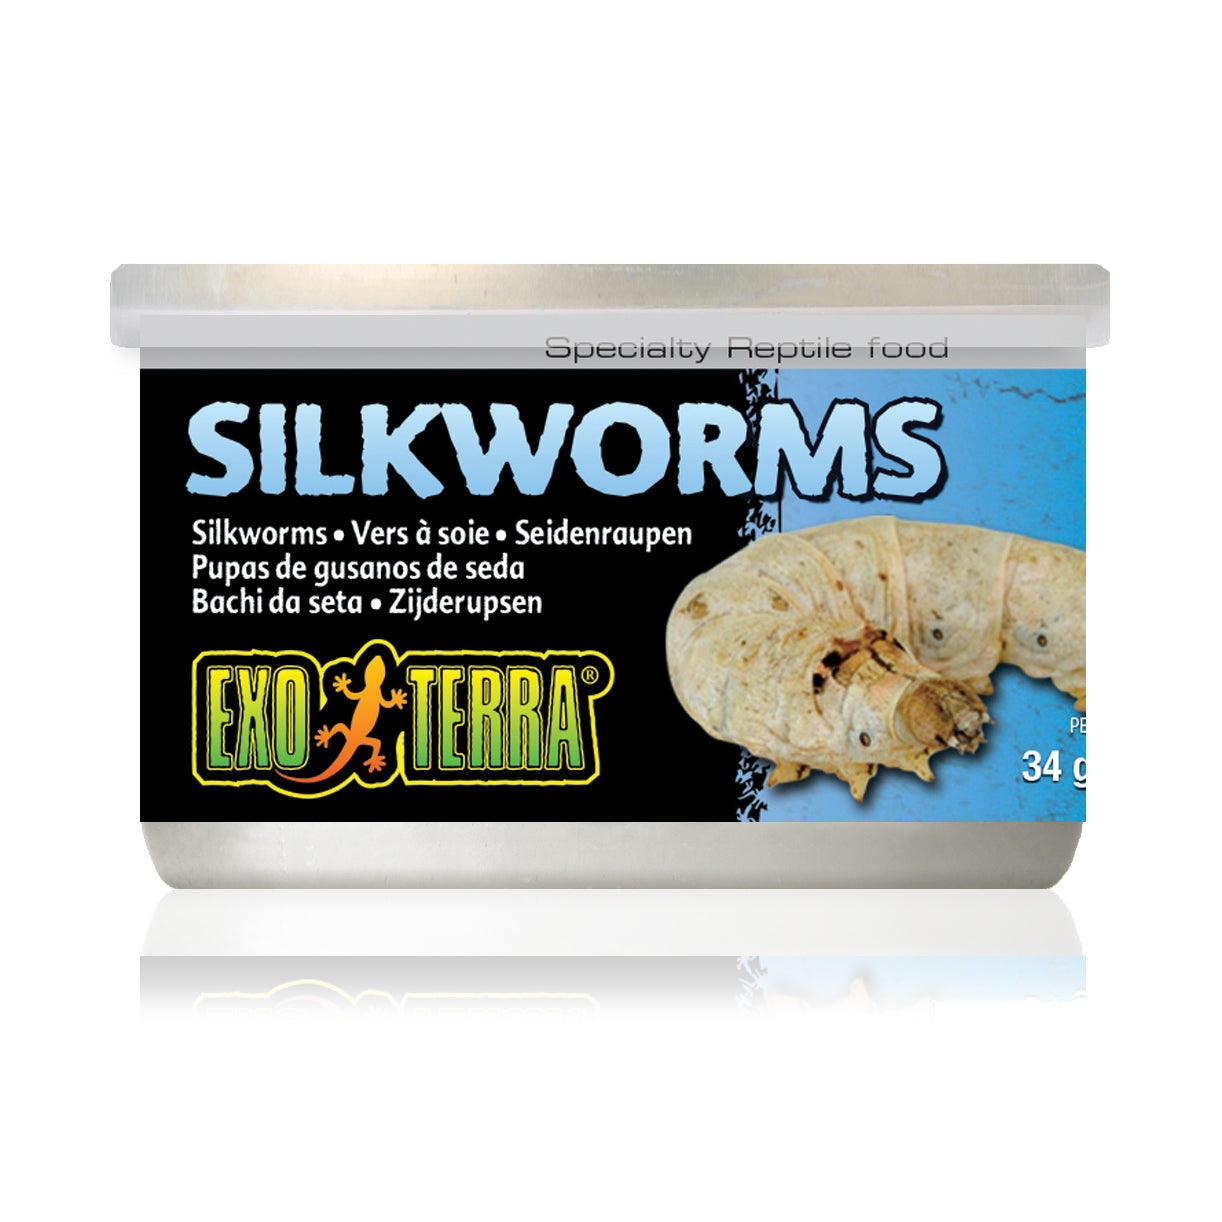 Exo Terra Canned Silkworms